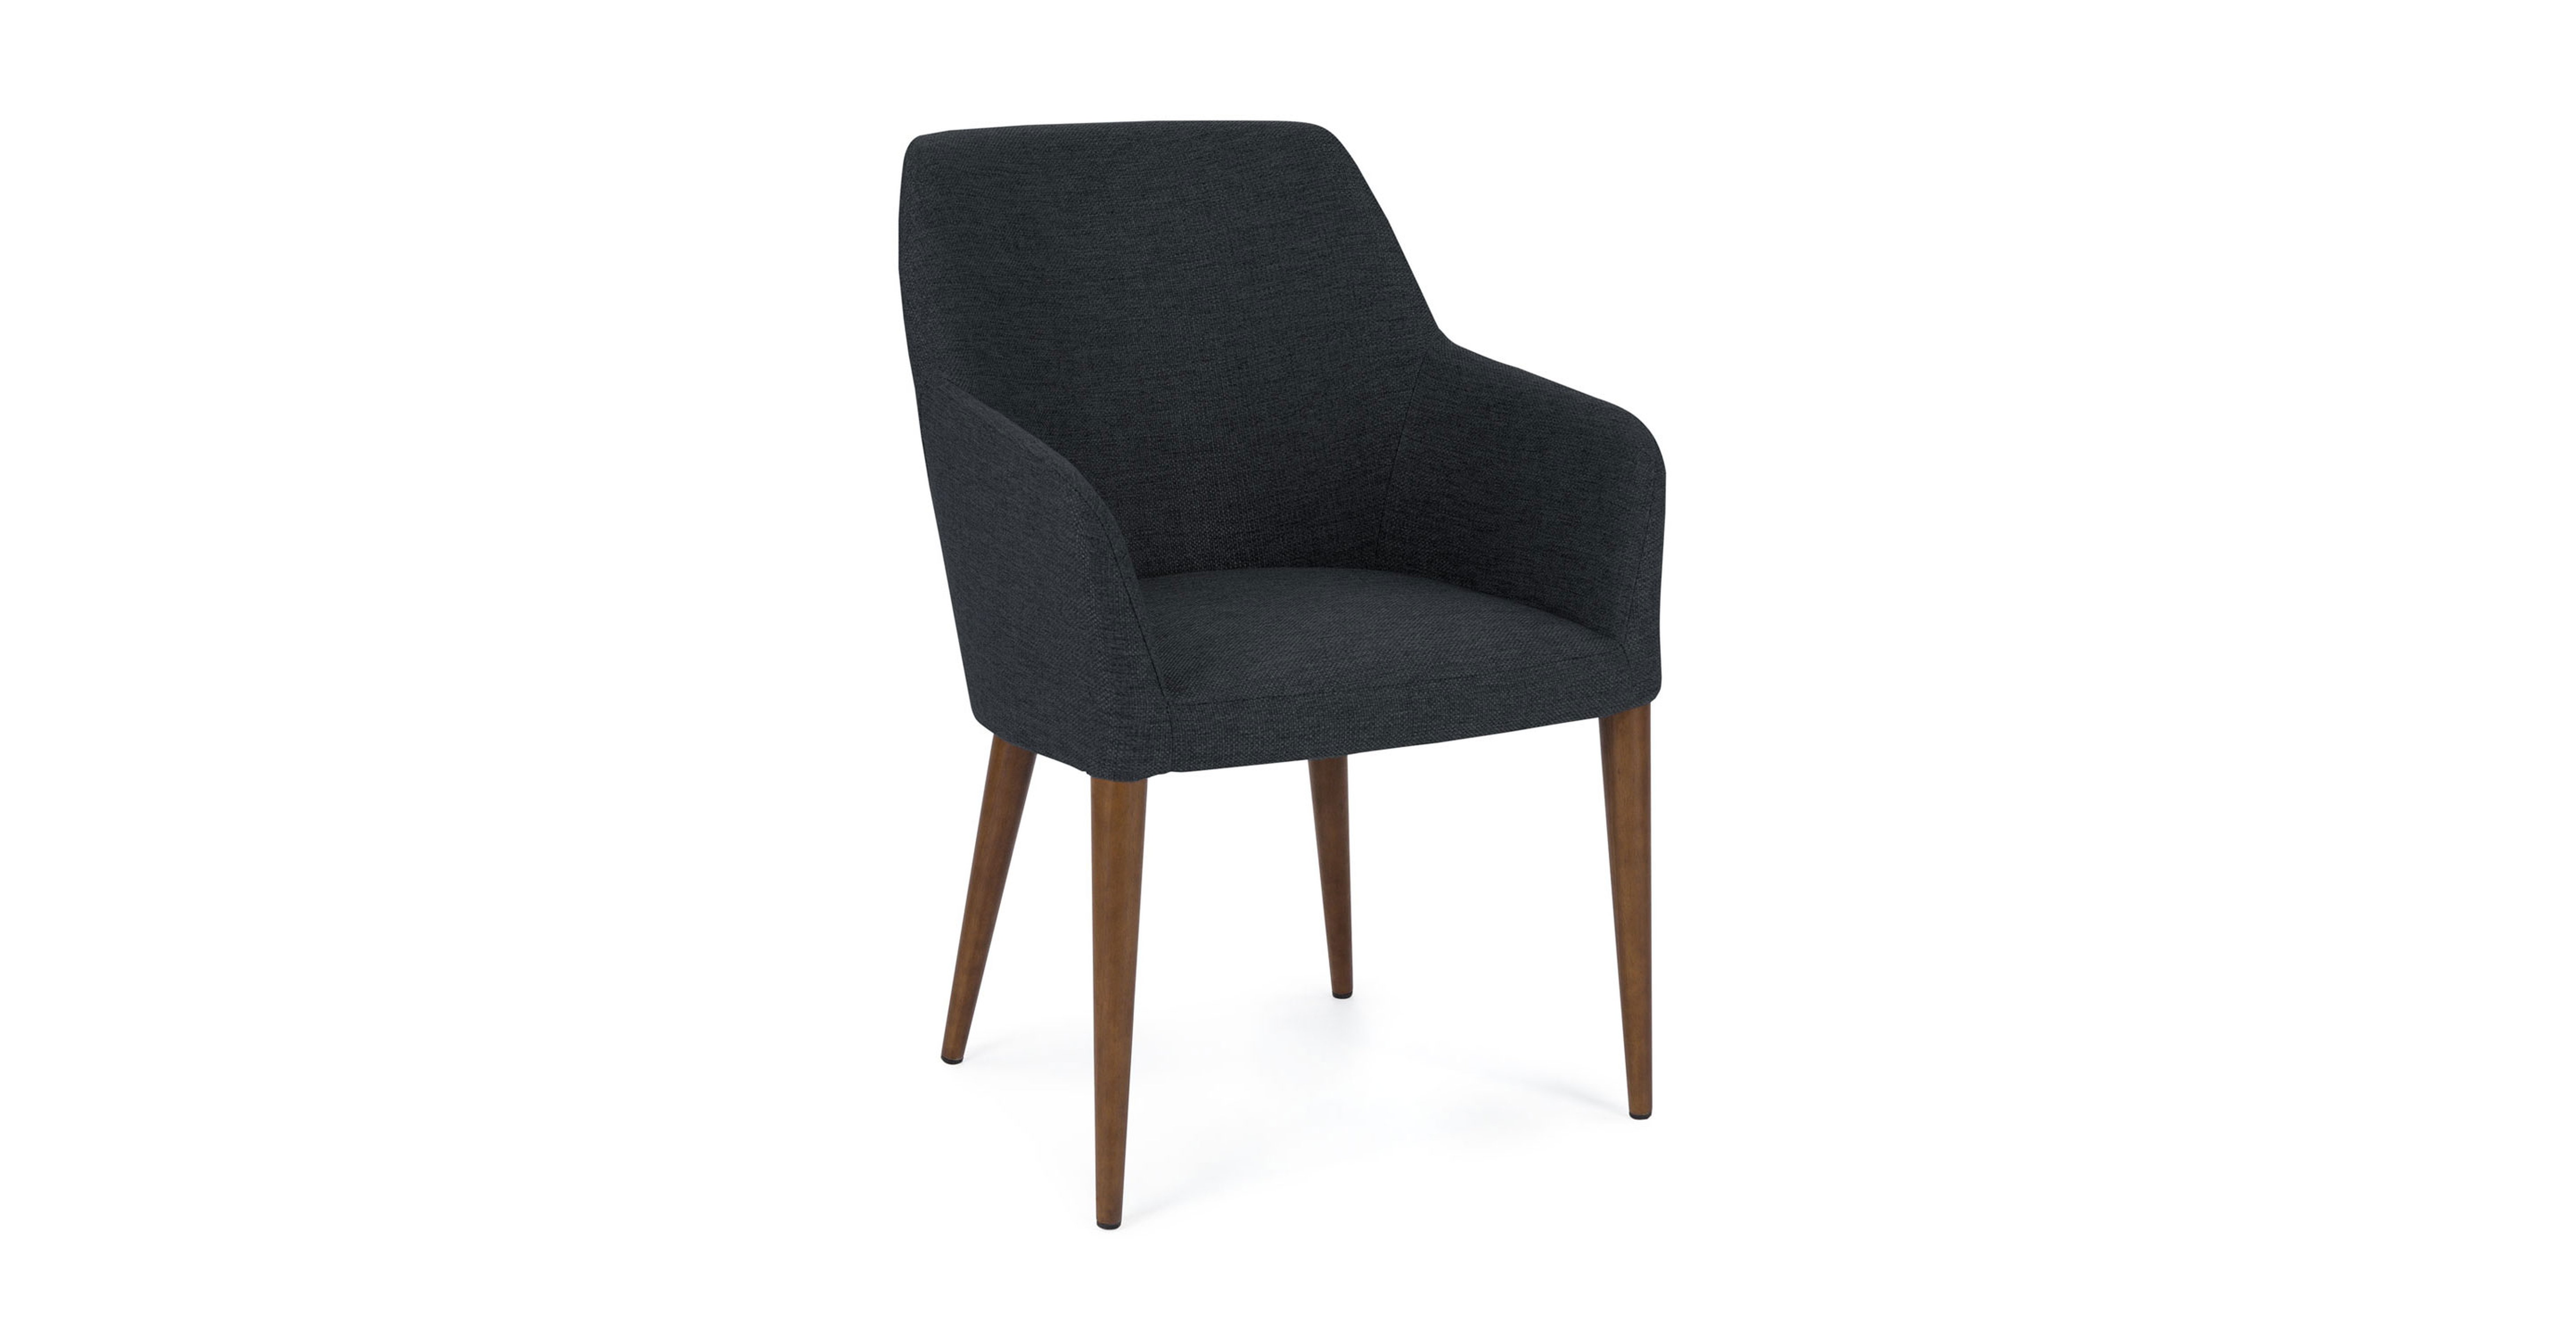 Feast Bard Gray Dining Chair - Article